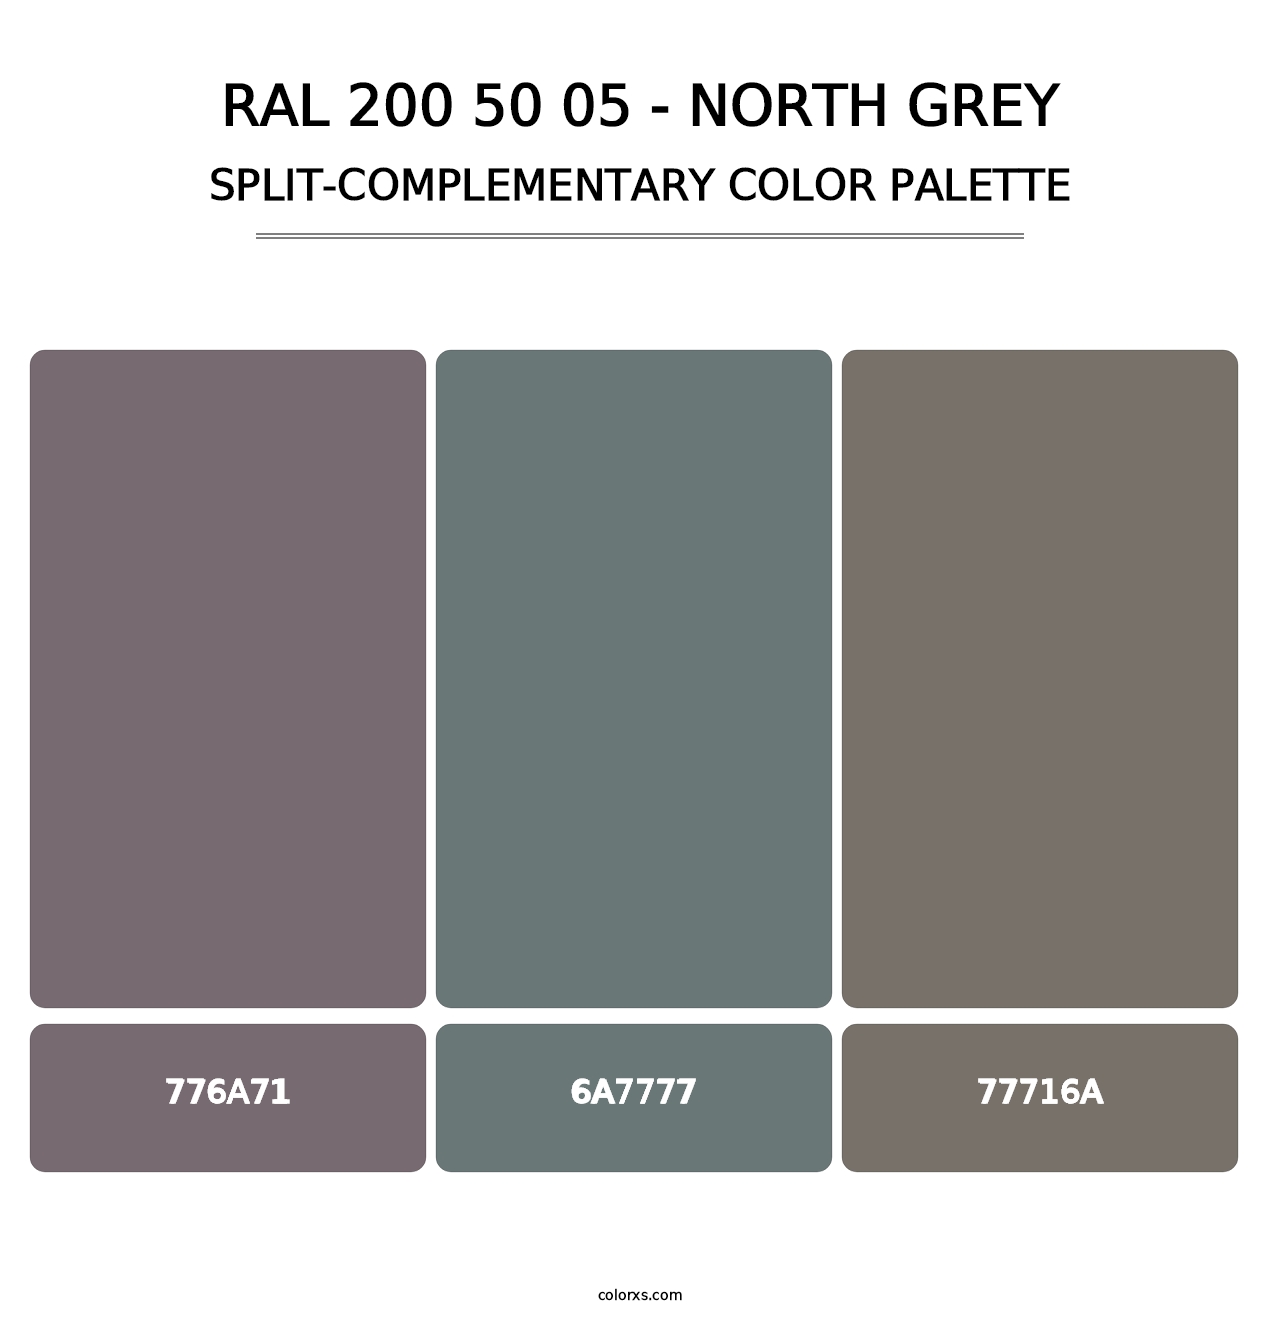 RAL 200 50 05 - North Grey - Split-Complementary Color Palette